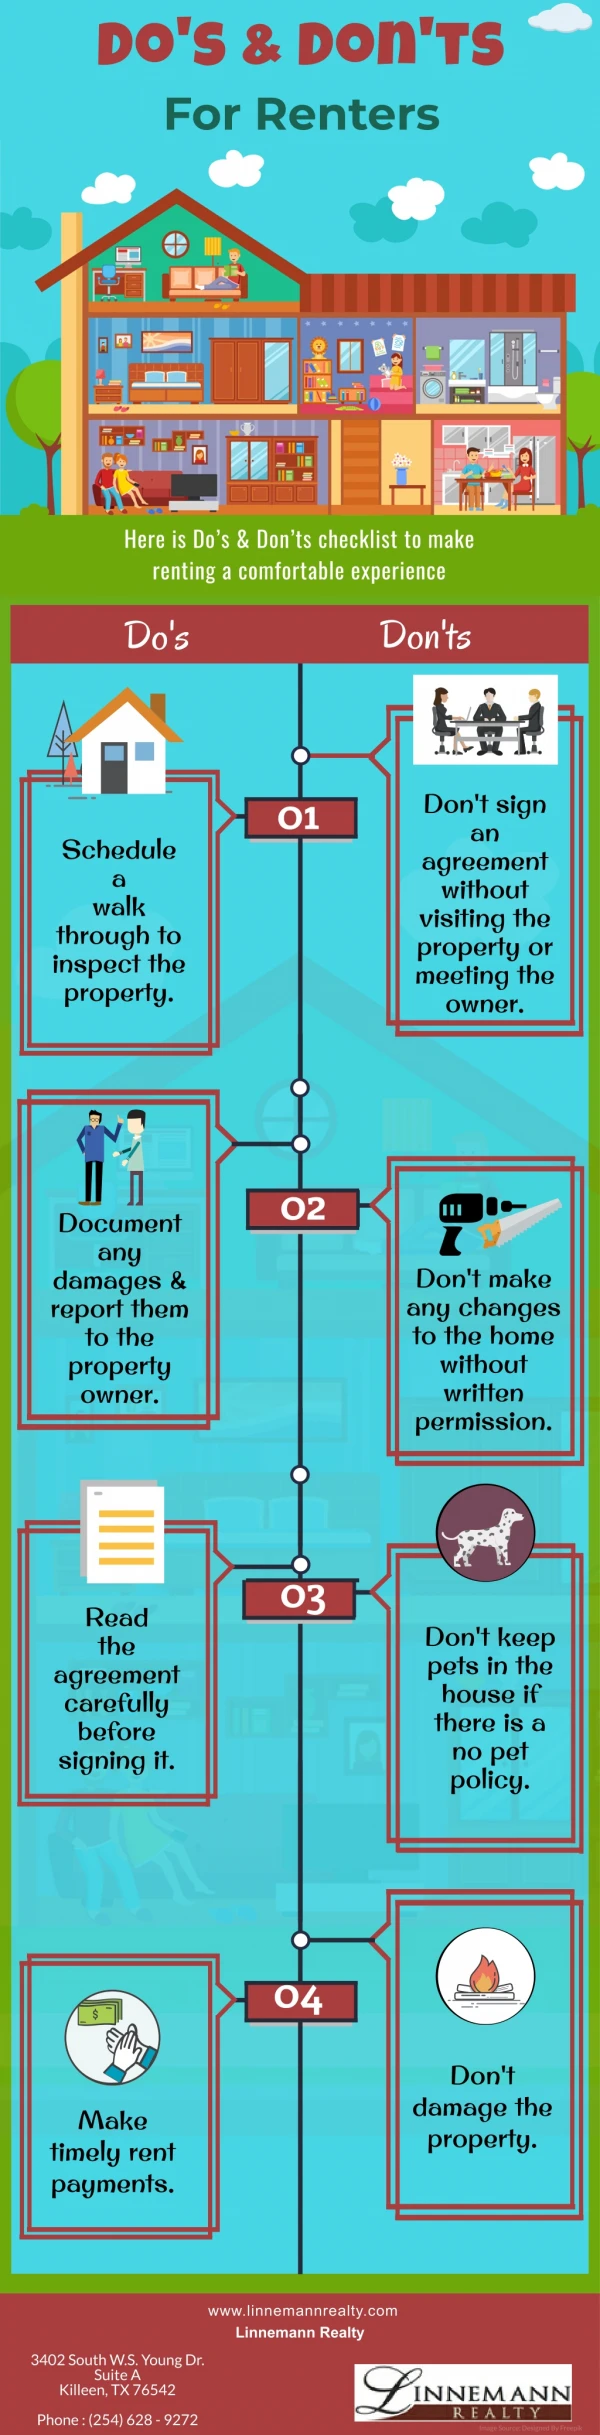 Do's & Don'ts For Renters